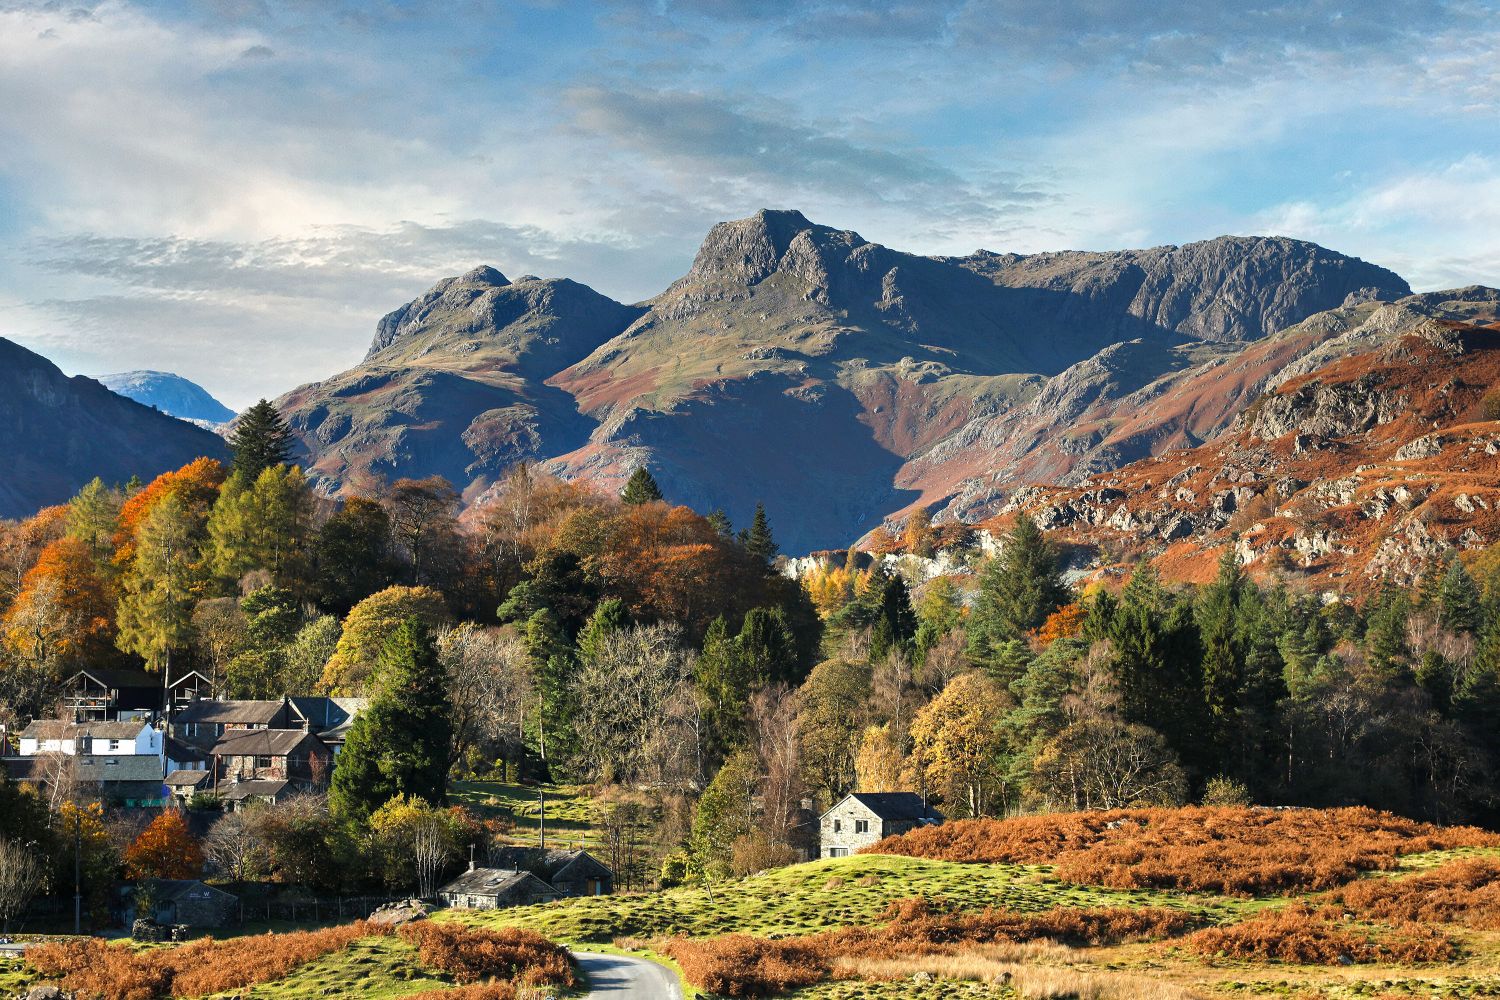 Autumn surrounds The Langdale Pikes by Martin Lawrence